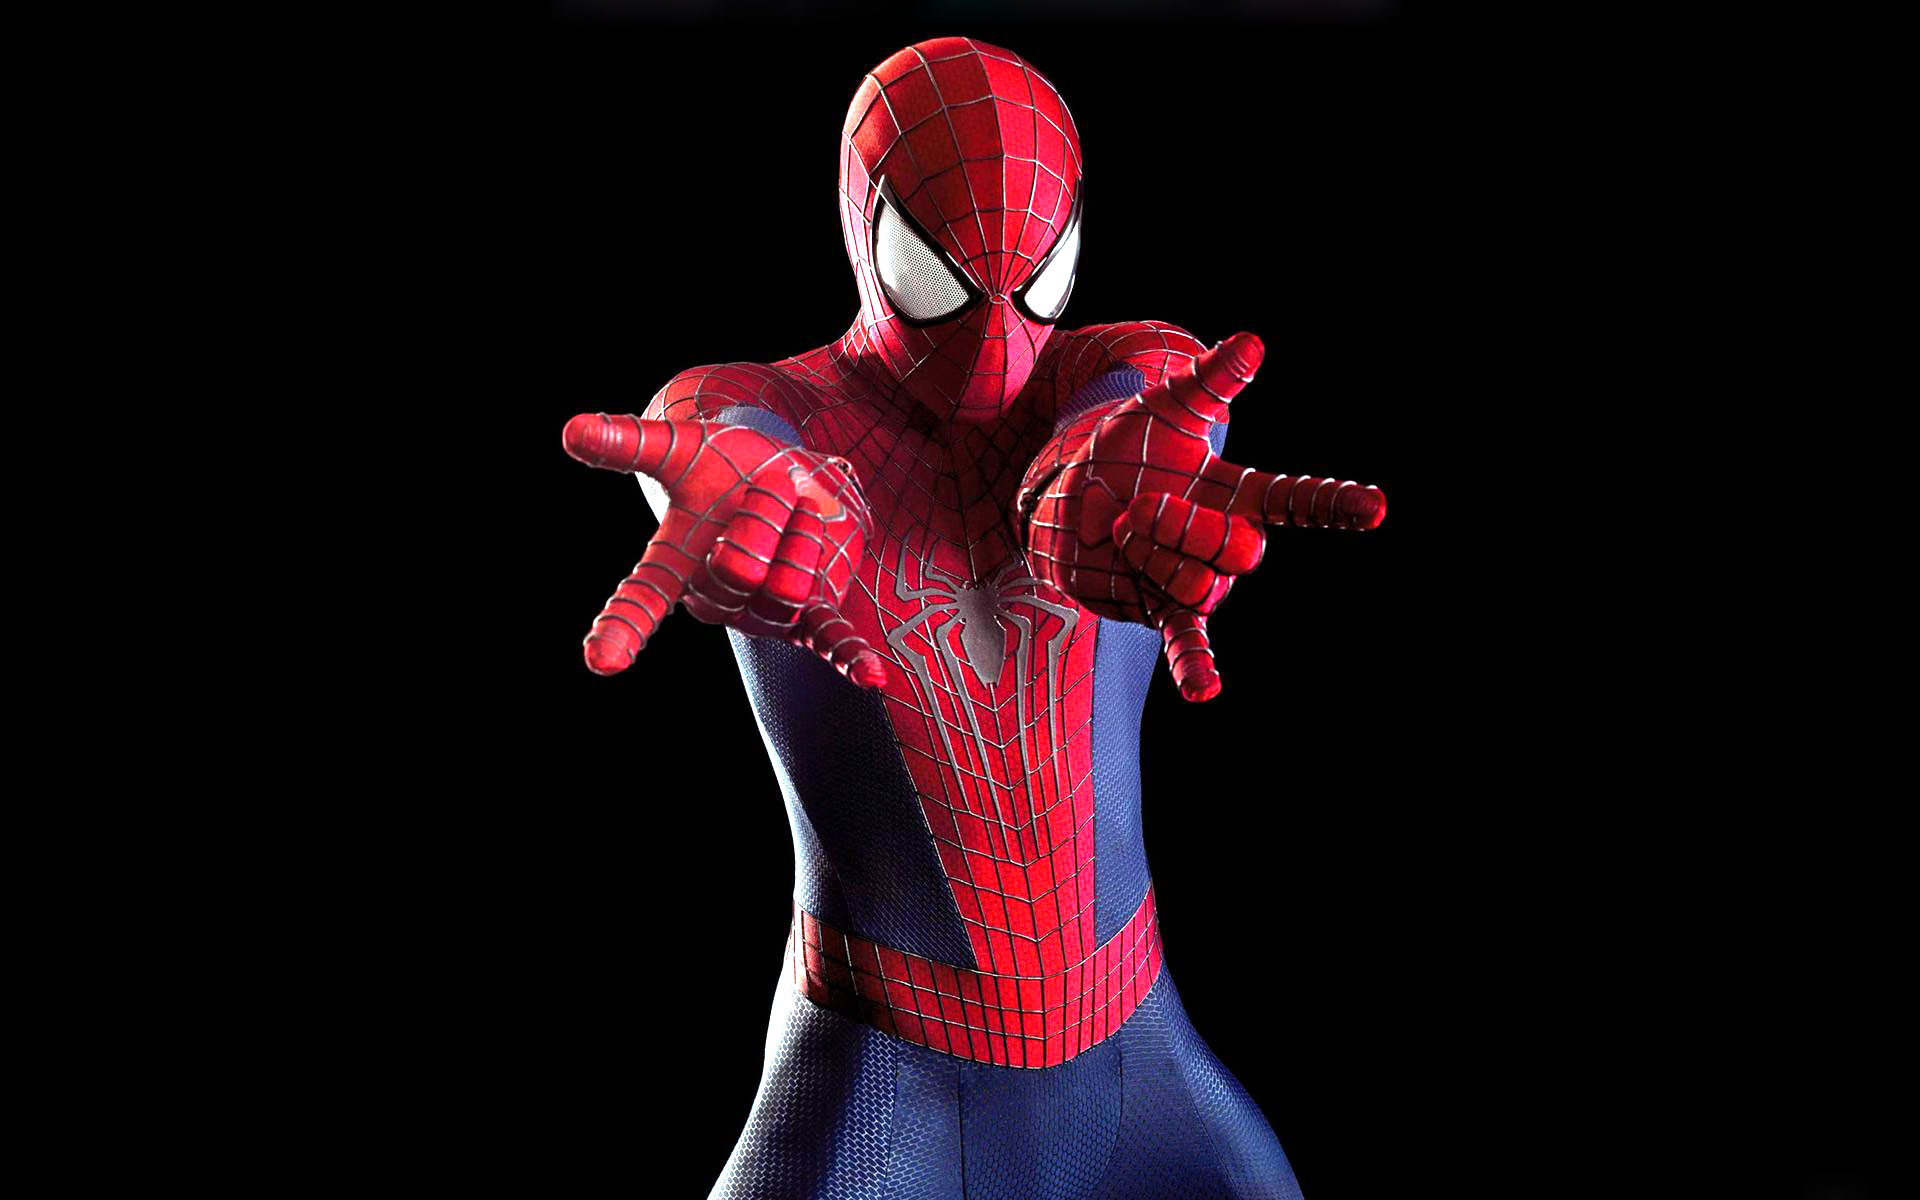 Free Download Amazing Spider Man 2 Hd Wallpapers Desktop Backgrounds The Amazing 1920x1200 For Your Desktop Mobile Tablet Explore 50 The Amazing Spider Man Hd Wallpaper Spiderman Wallpaper For